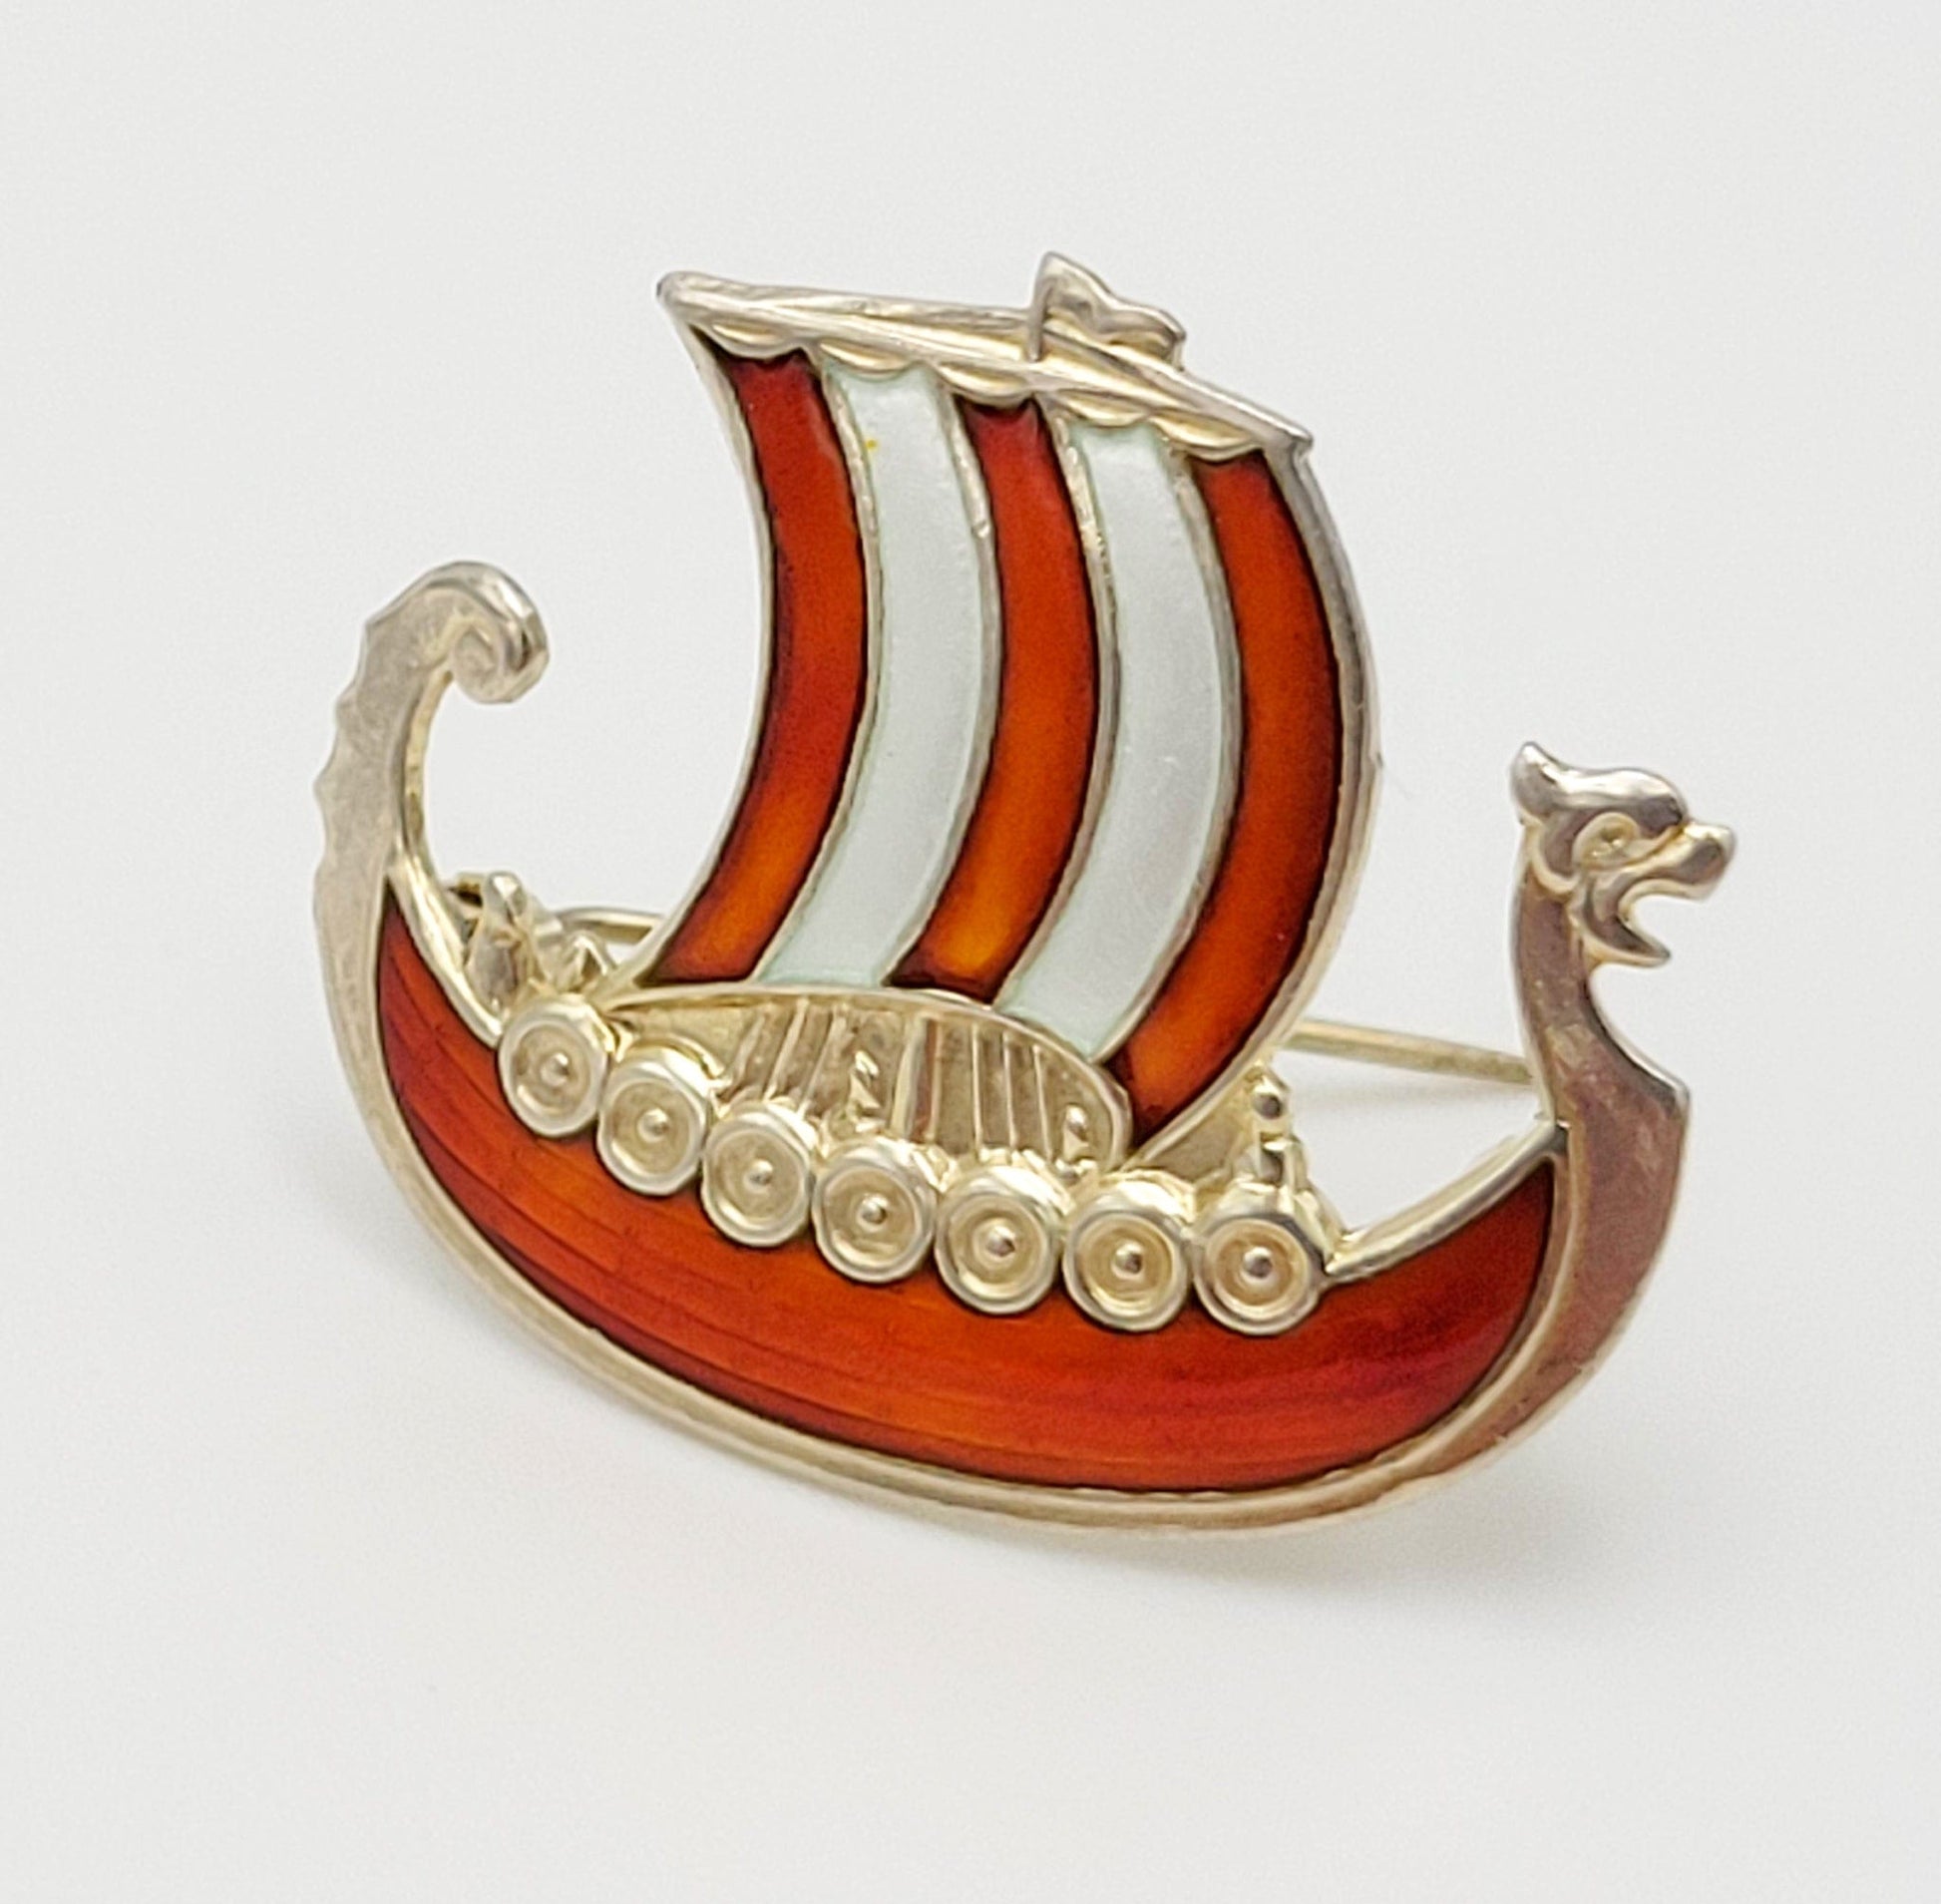 Ivar Holth Jewelry Ivar Holth Norway Sterling Red Enamel Viking Ship Longboat Brooch Pin 1950s